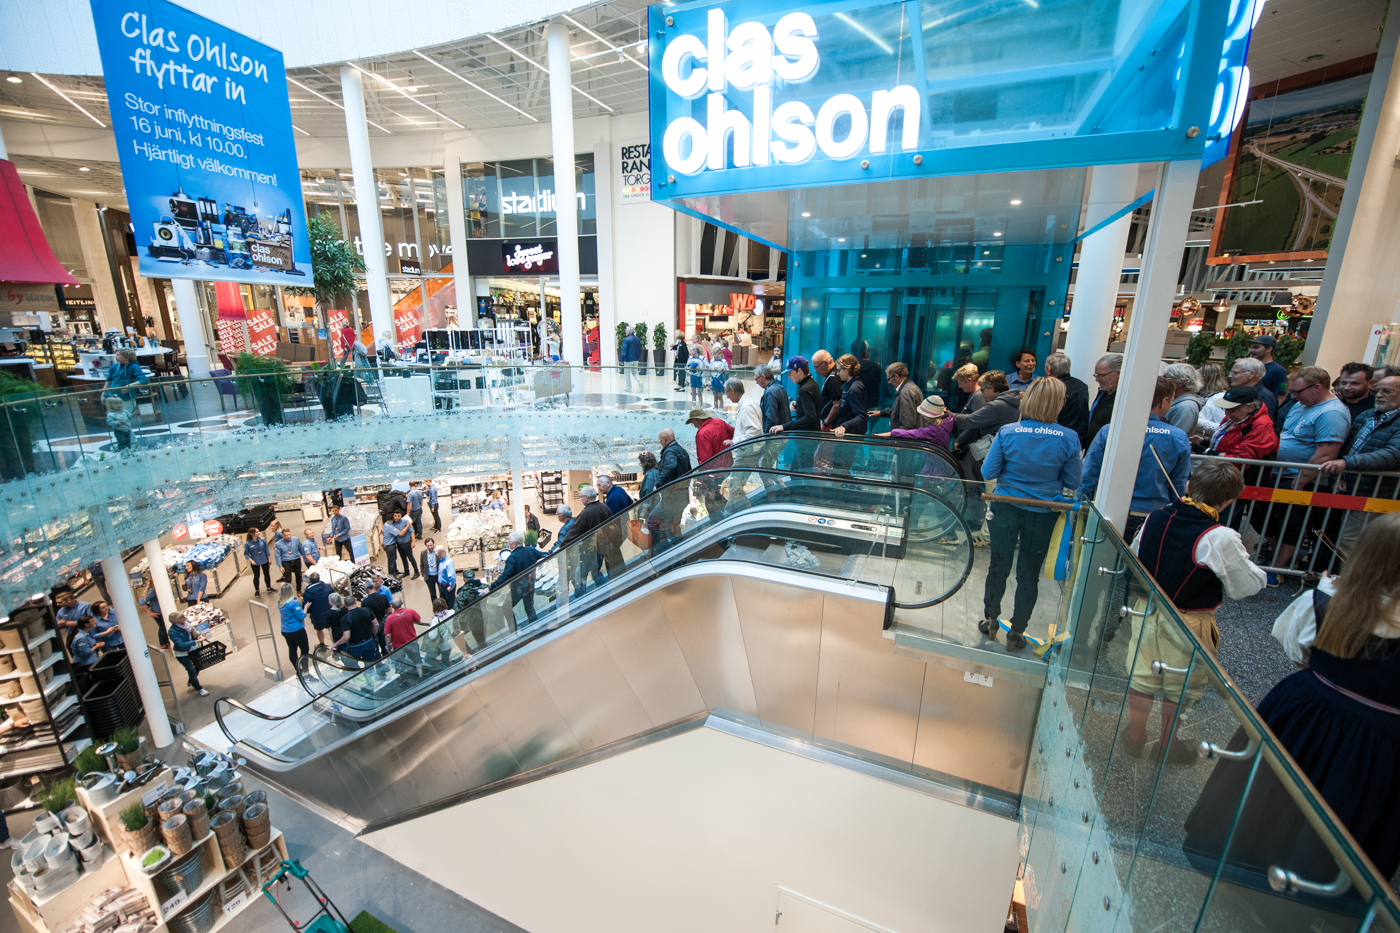 Clas Ohlson store in Helsingborg, Sweden, has opened in new premises